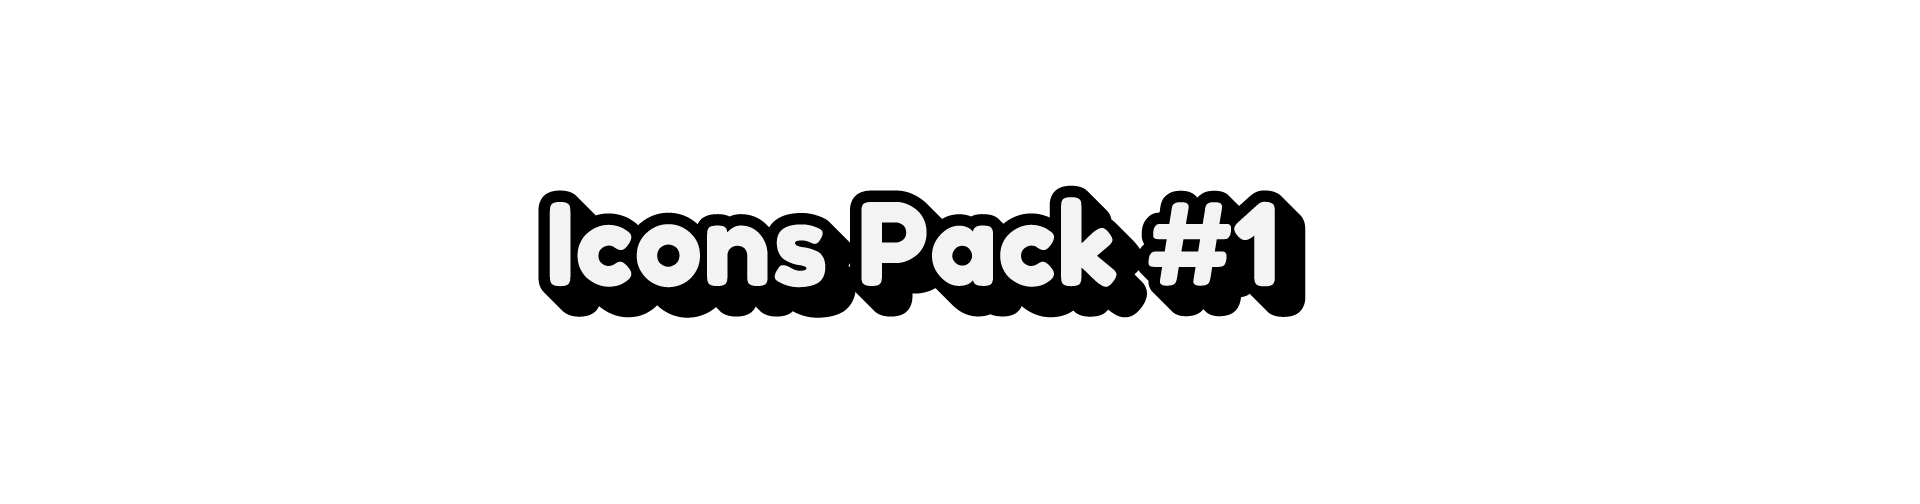 Icons Pack #1